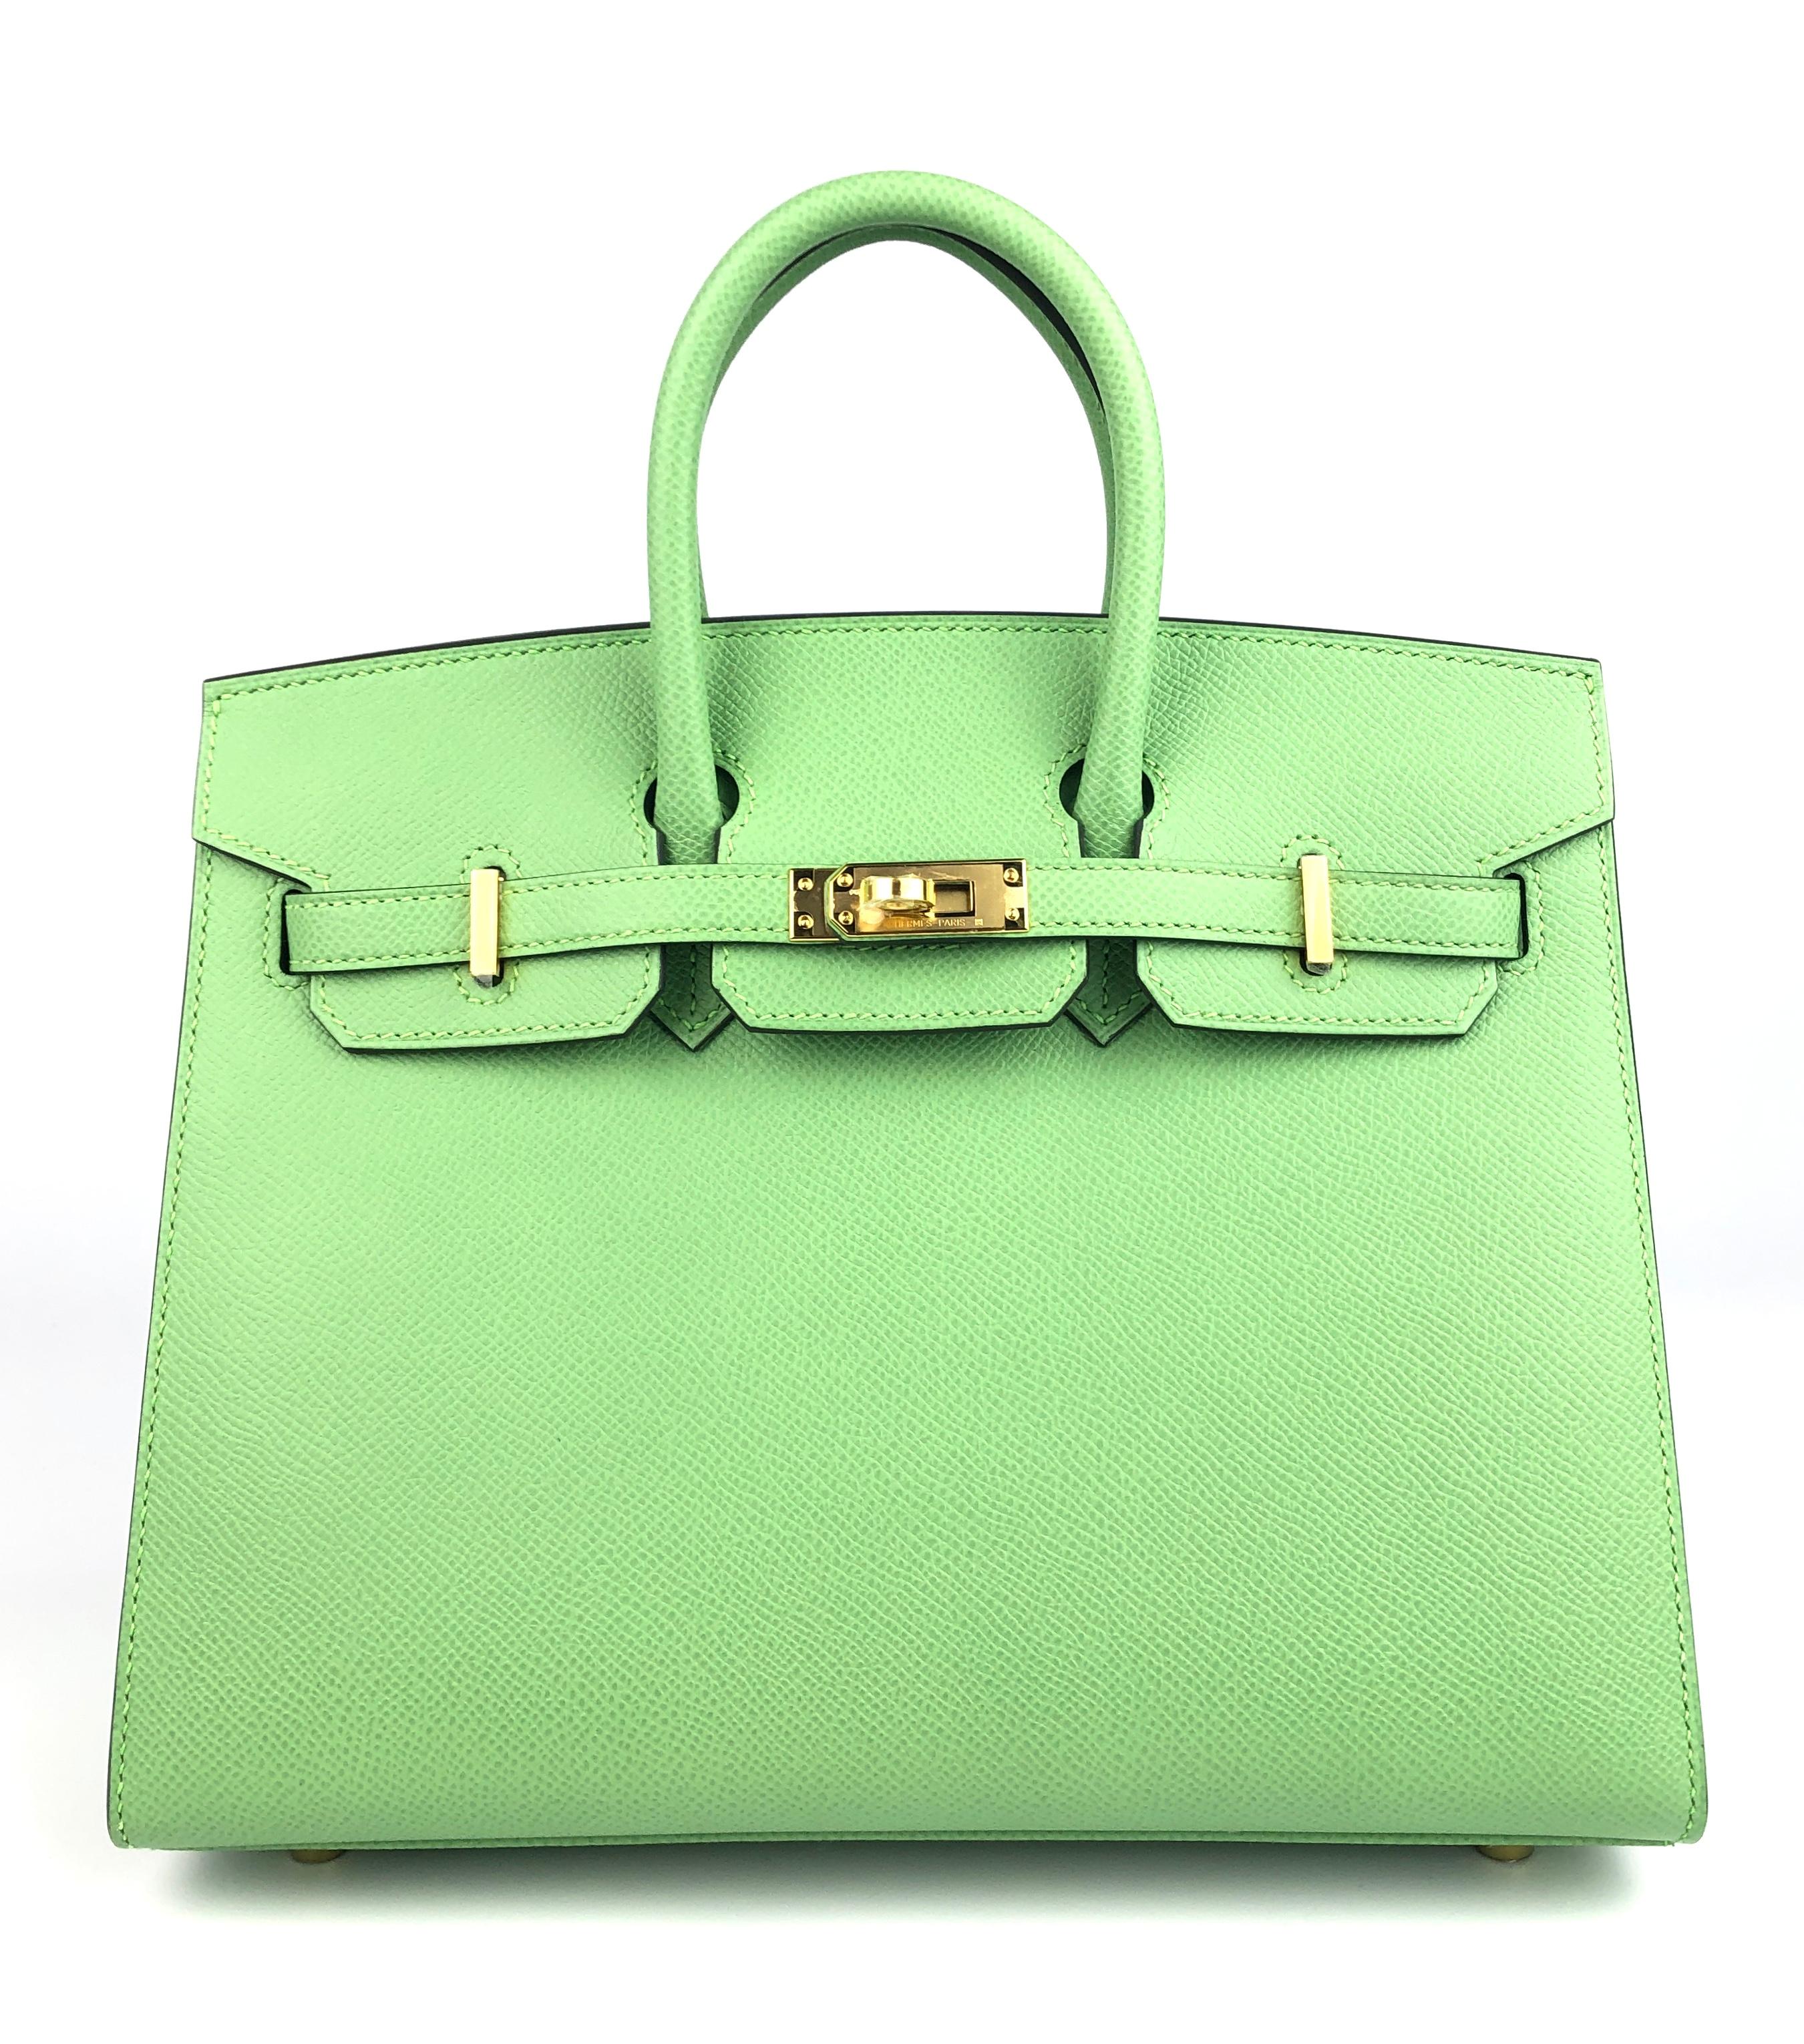 Brand New Ultra Rare Stunning Hermès Birkin 25 Sellier Epsom Leather Vert Criquet Gold Hardware. Z Stamp 2021. 
One of the most coveted hardest to get colors since 2020! Includes all accessories and Box. 

Shop with Confidence from Lux Addicts.